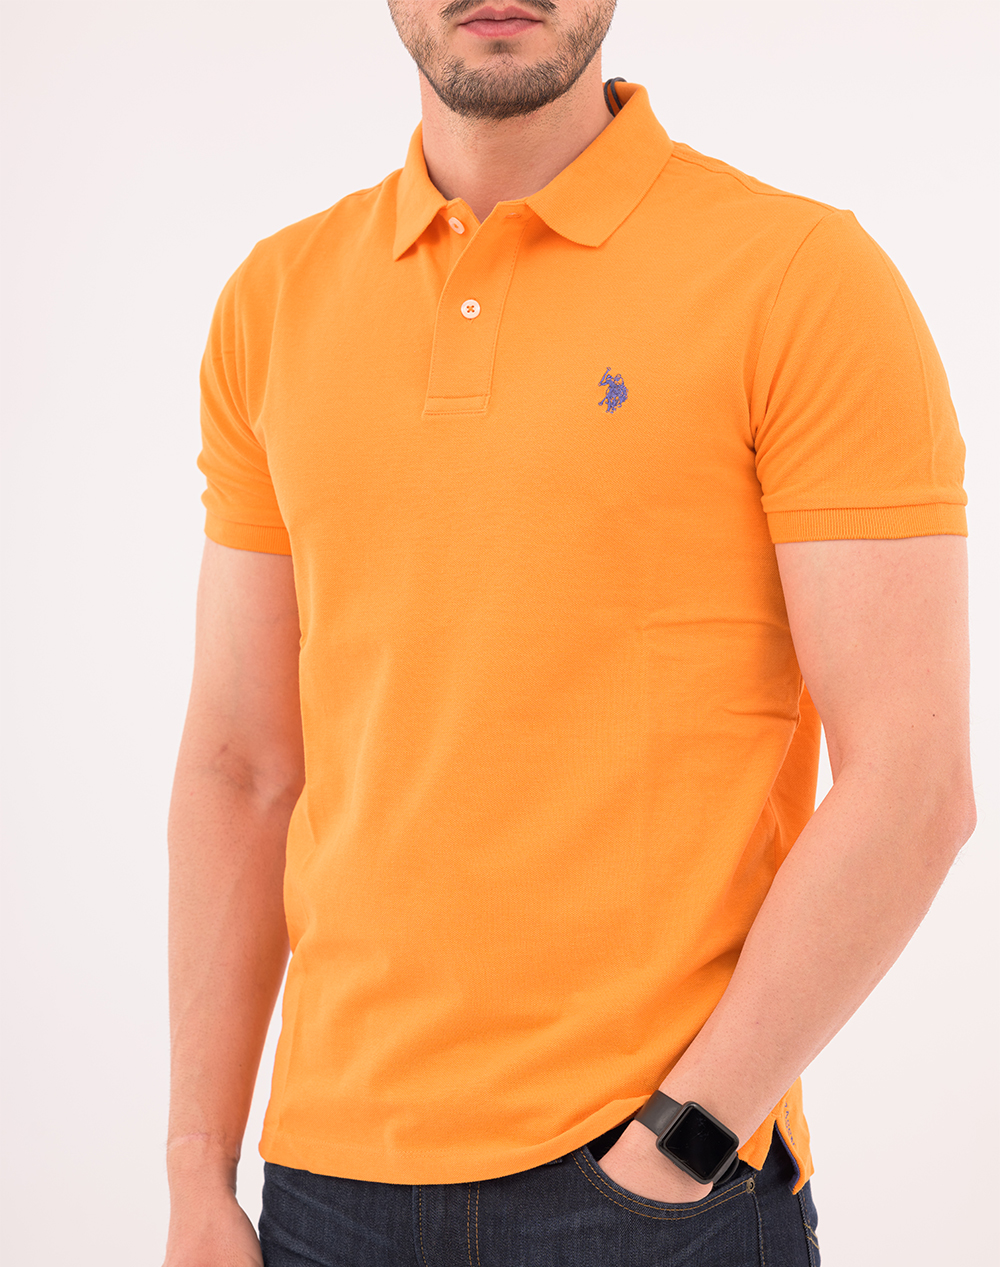 US POLO ASSN KING 41029 EHPD POLO PACK OF 400 ΜΠΛΟΥΖΑ ΑΝΔΡΙΚΟ 6735541029P400-215 Orange